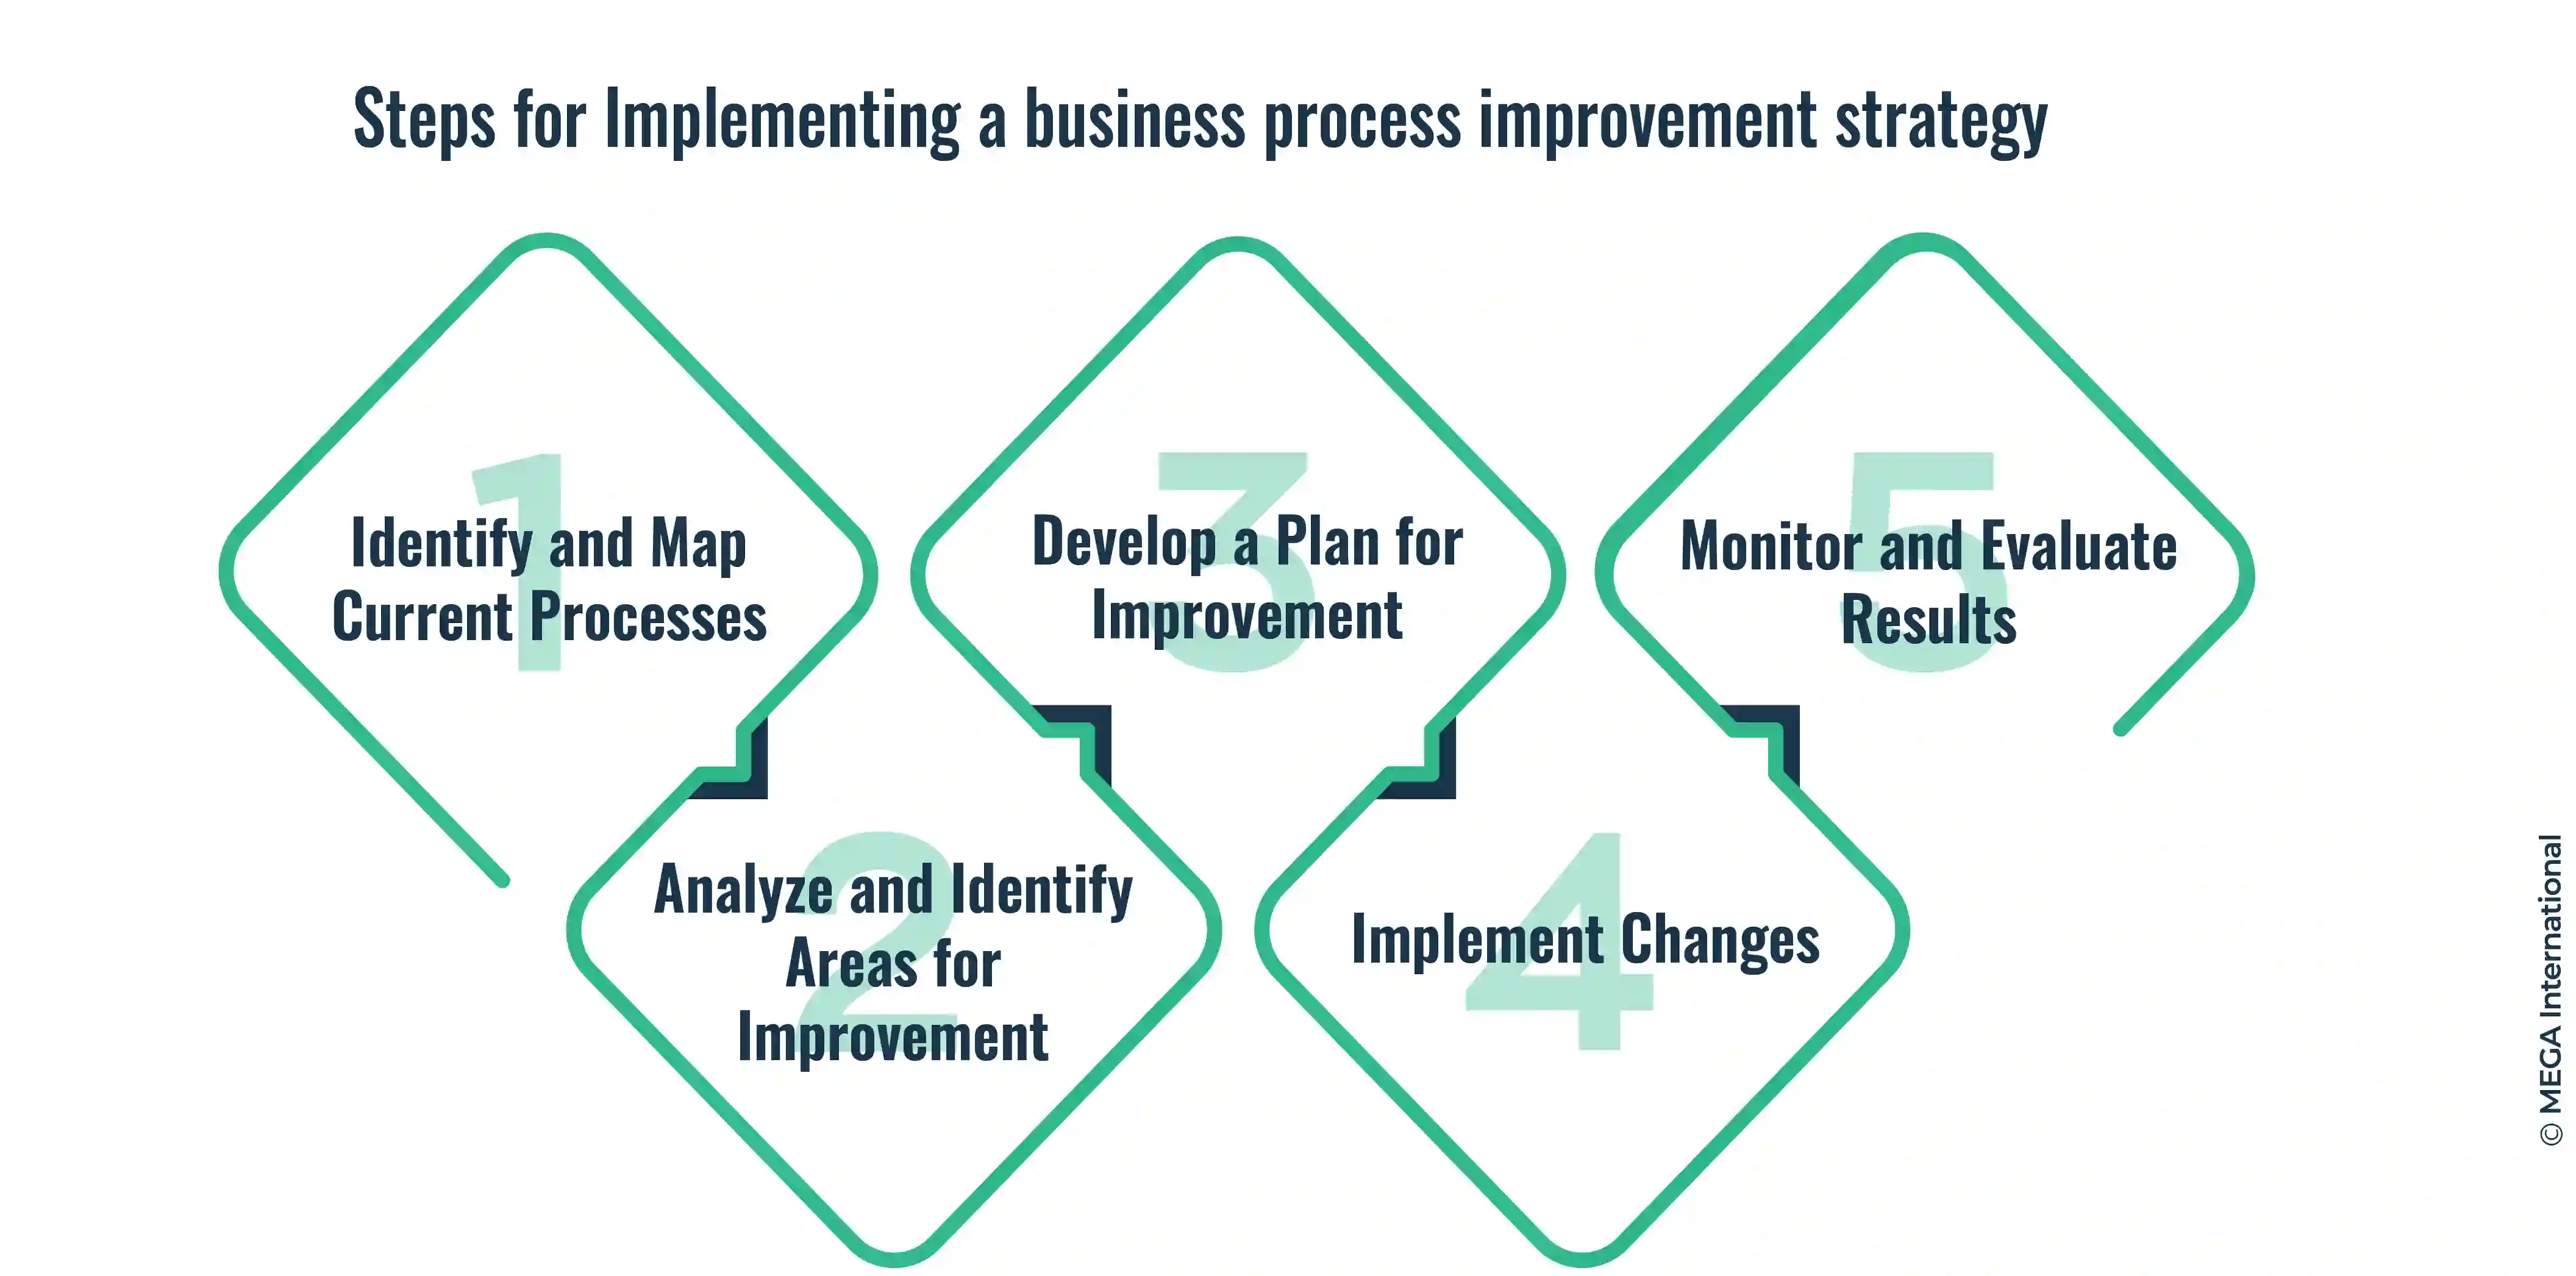 Steps for Implementing a business process improvement strategy 